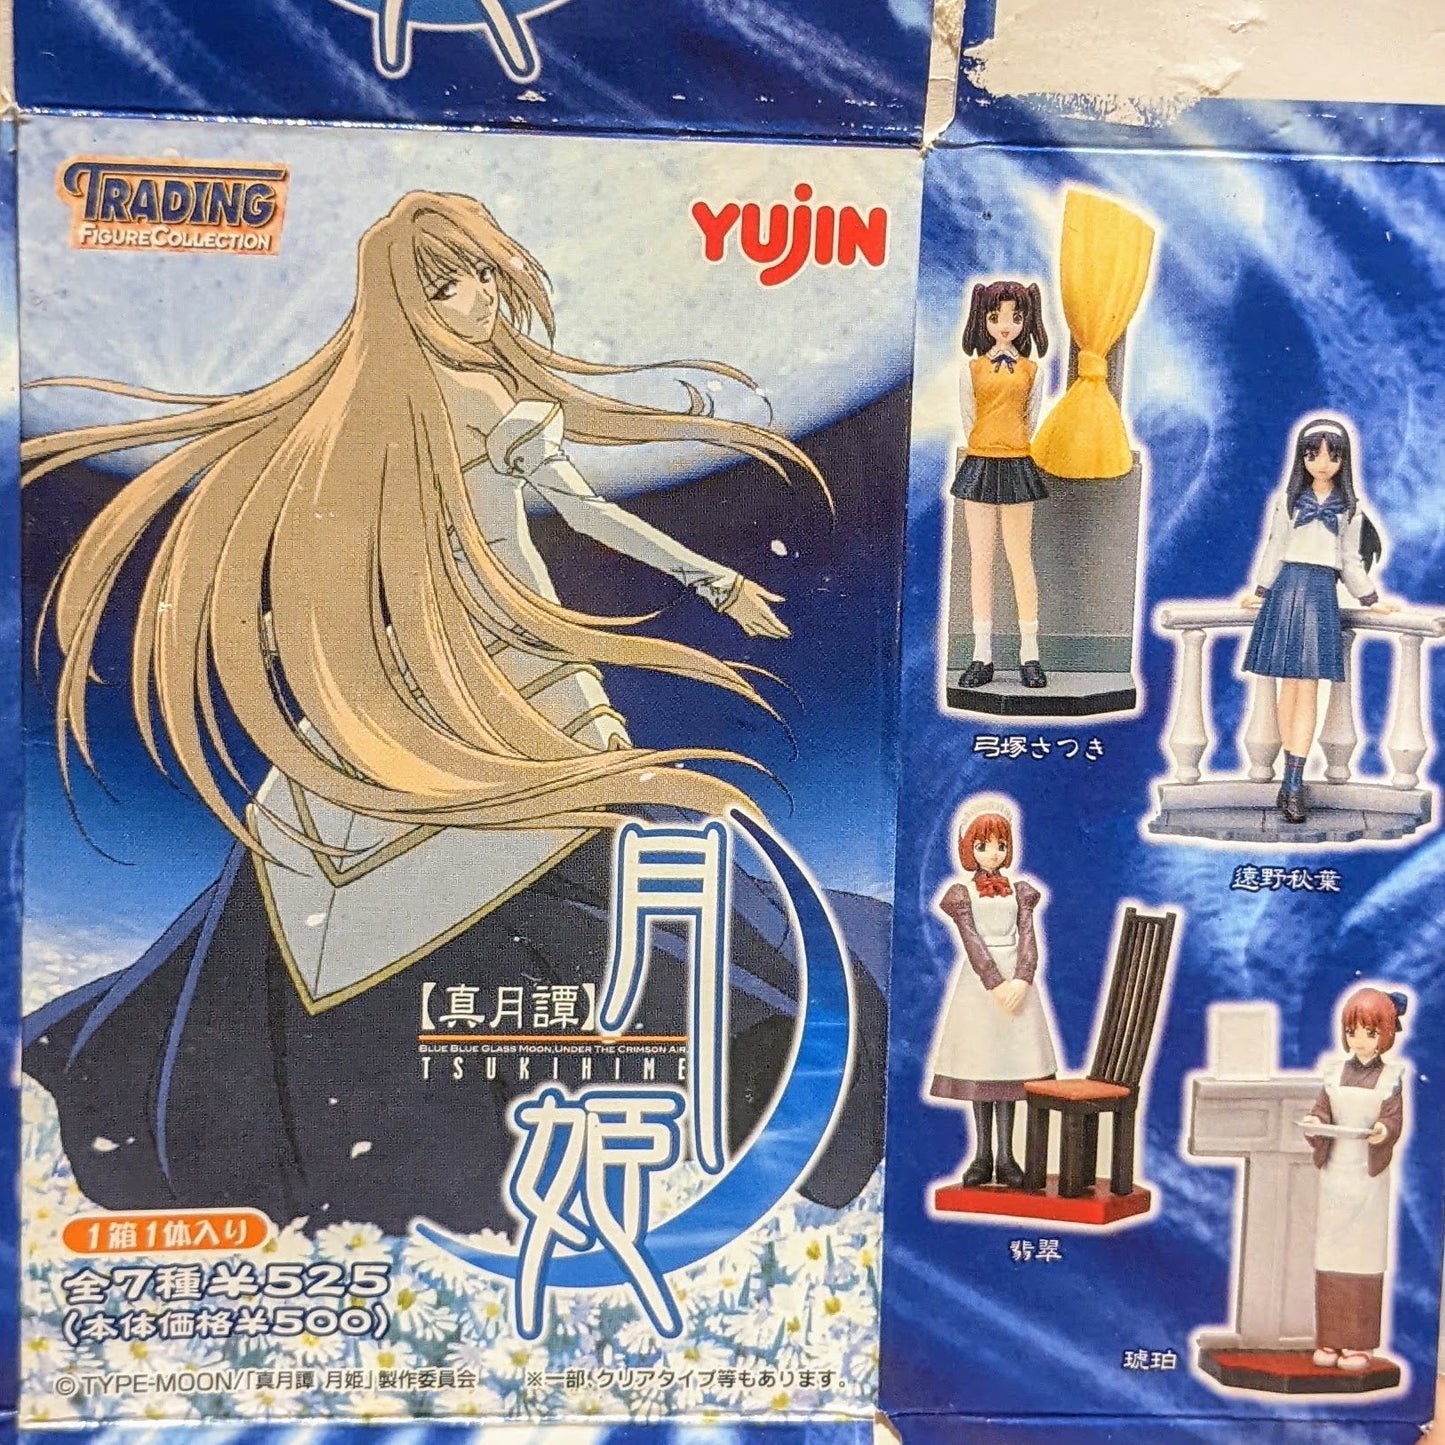 Yujin Type-Moon Tsukihime Melty Blood 7 Clear Trading Collection Figure Set